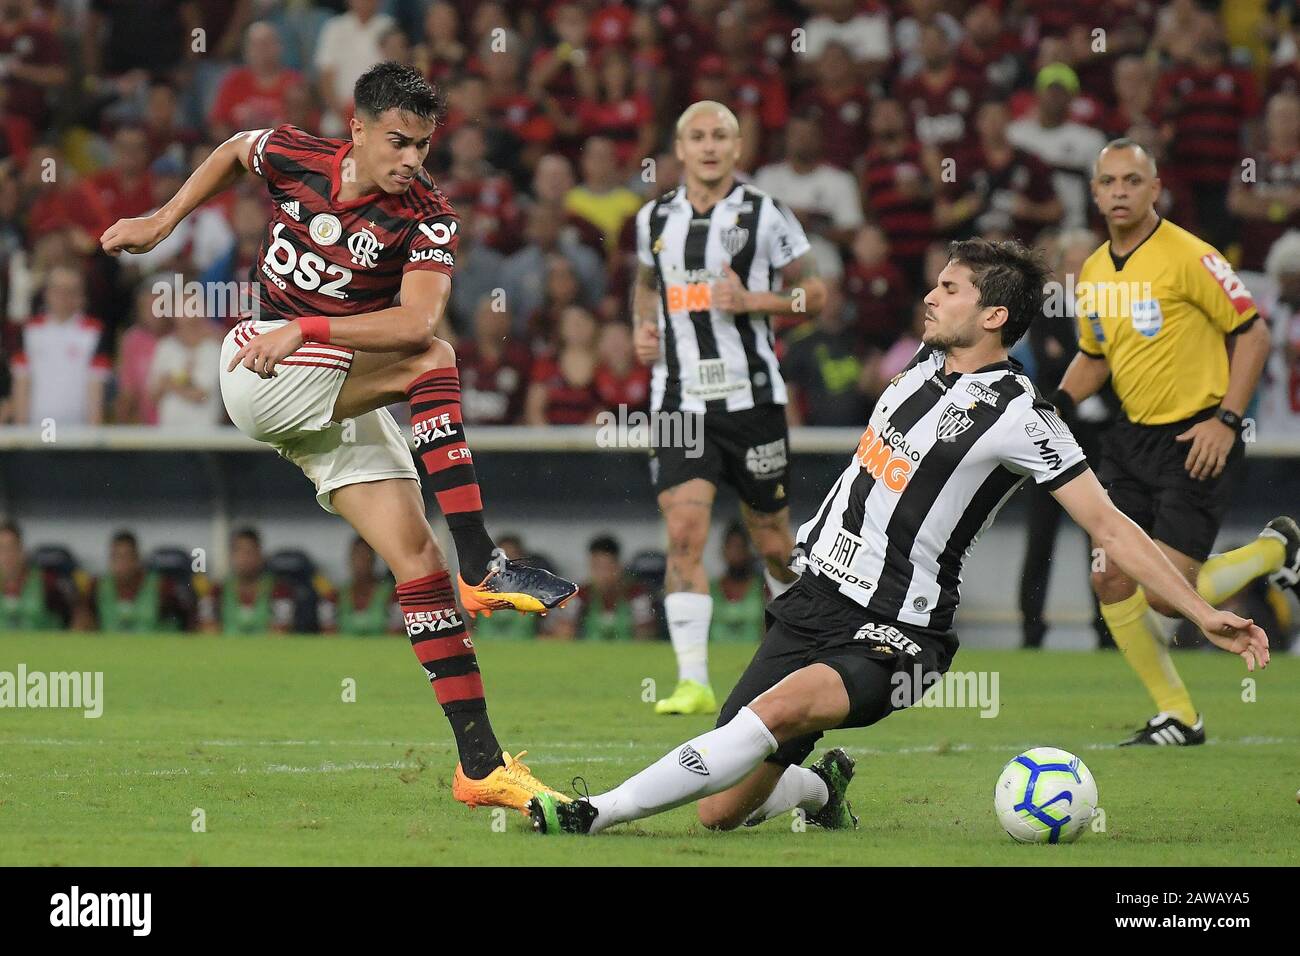 Rio de Janeiro, Brazil, October 10, 2019. Football player Reinier of the Flamengo team, celebrates his goal during the game against Atlético-MG at Mar Stock Photo